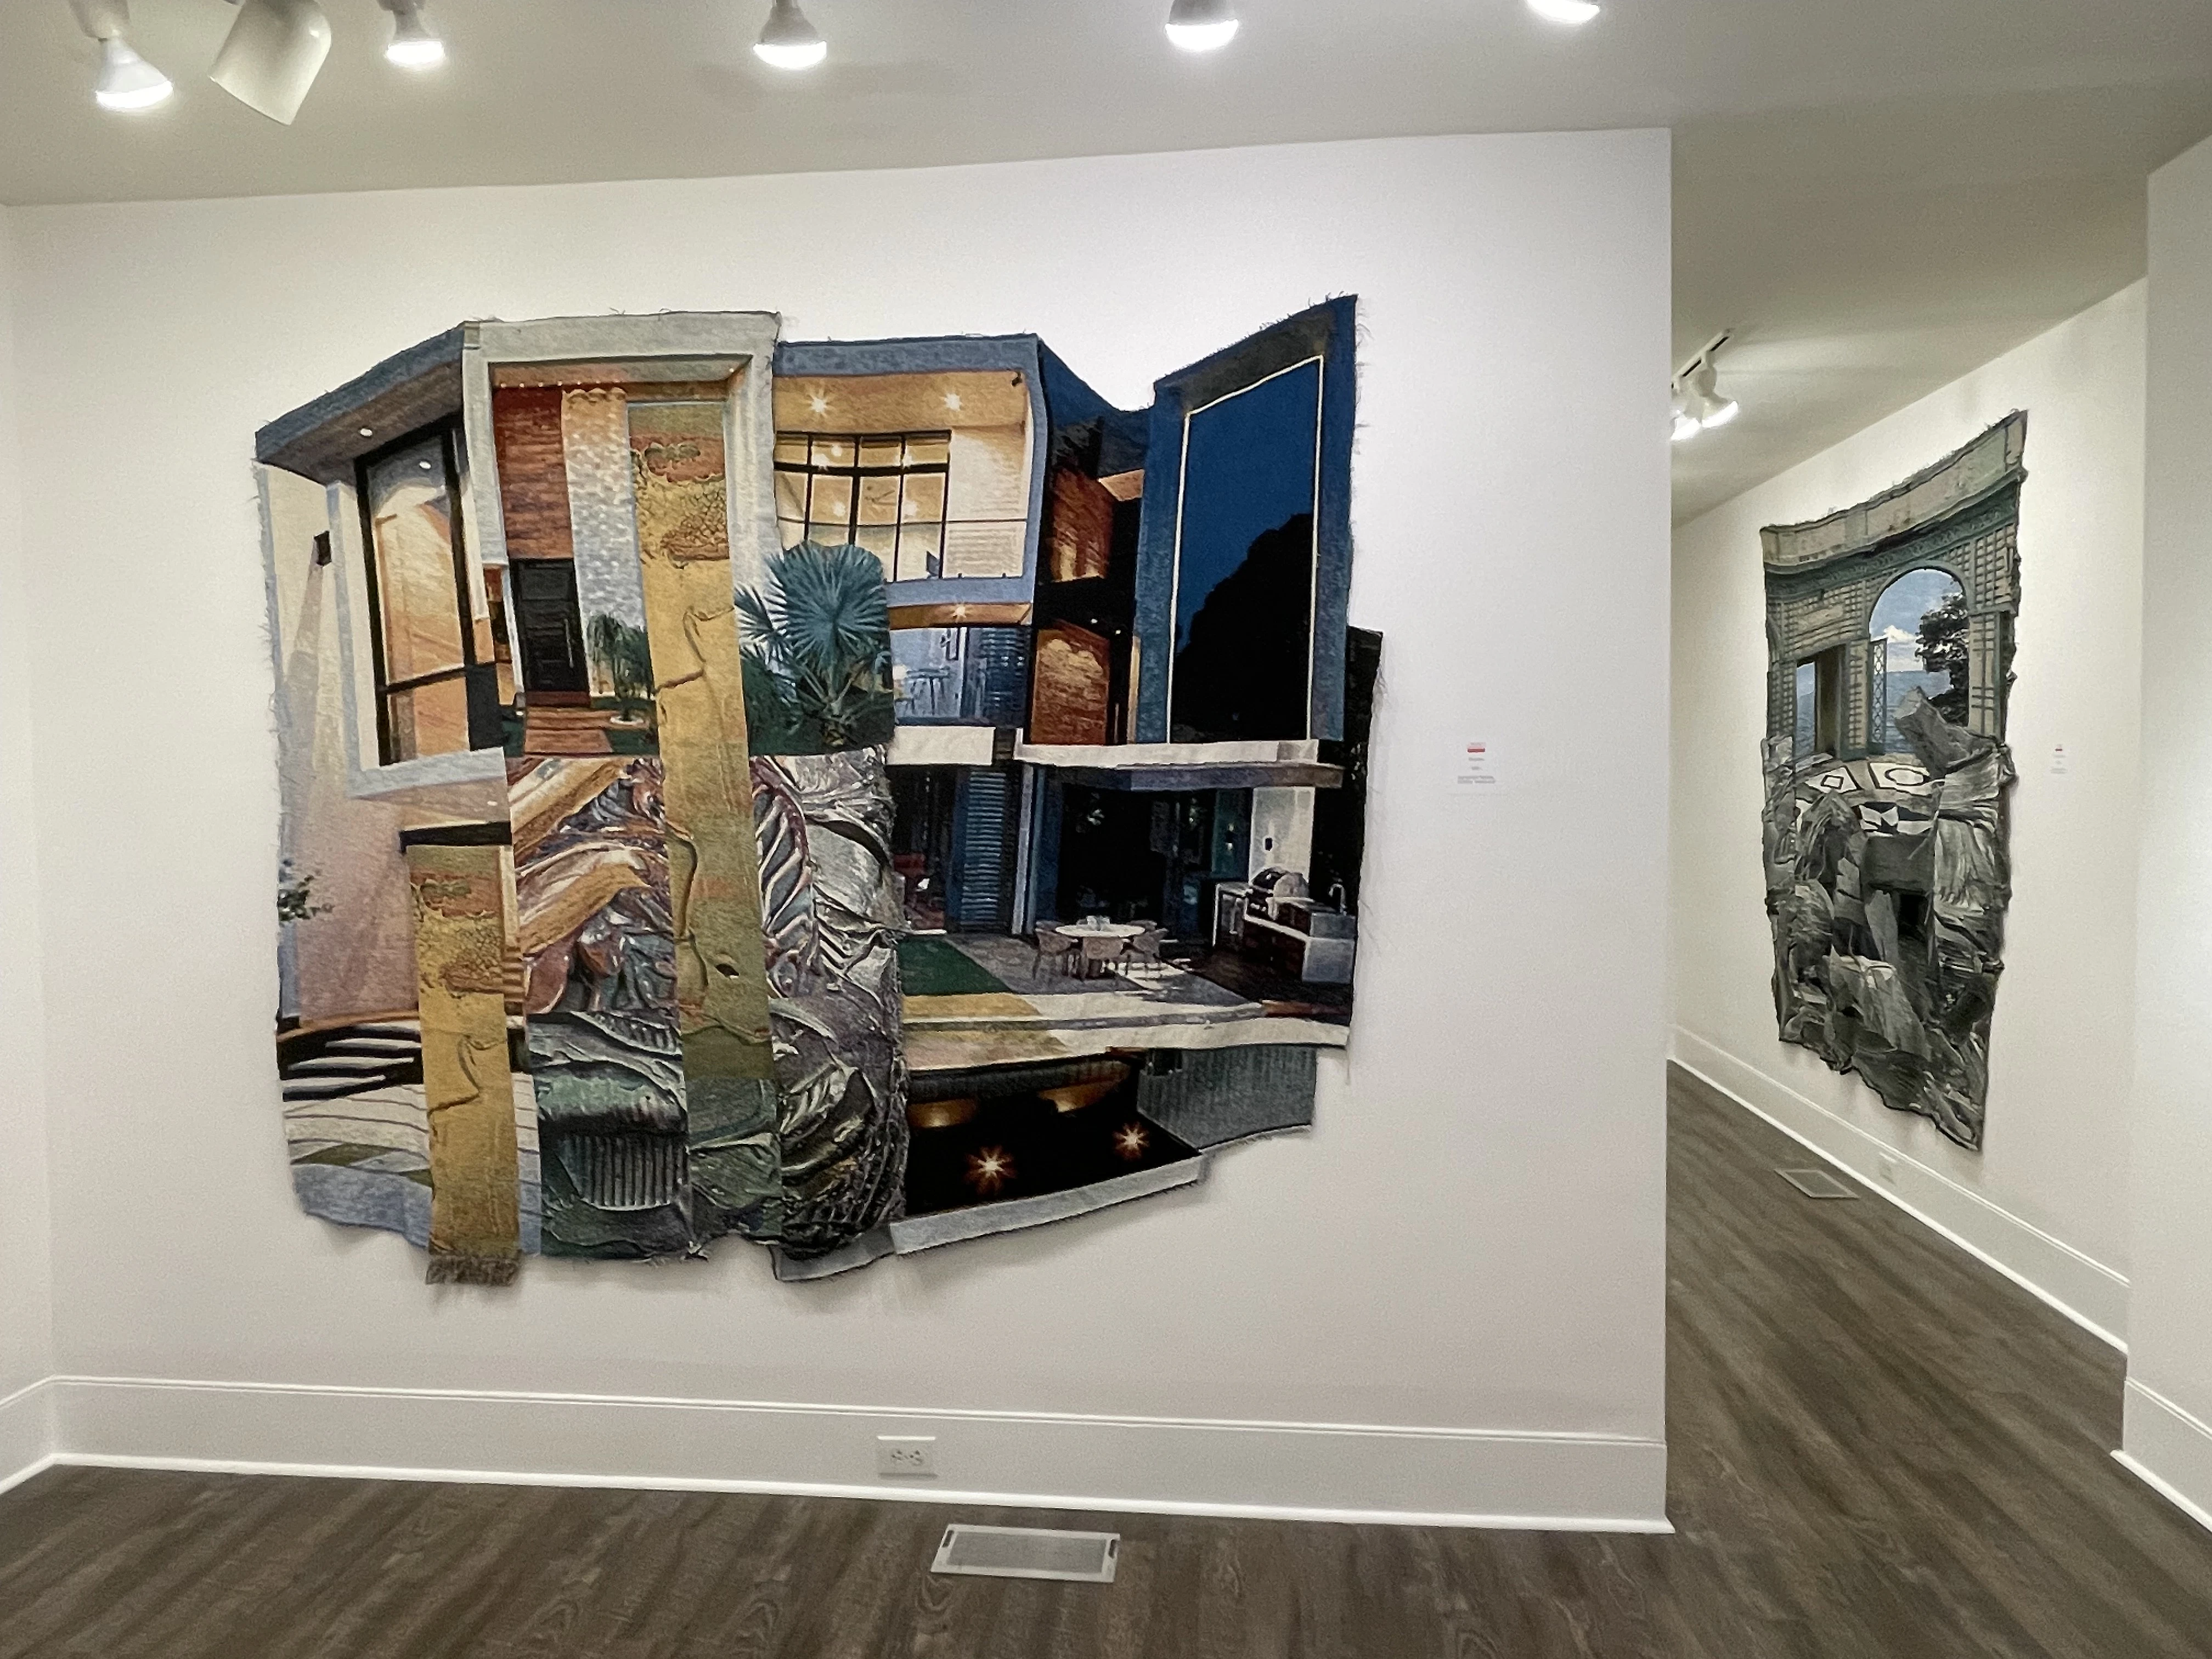 'Private property' (solo) at Myrtle Beach Art Museum, SC, 2021